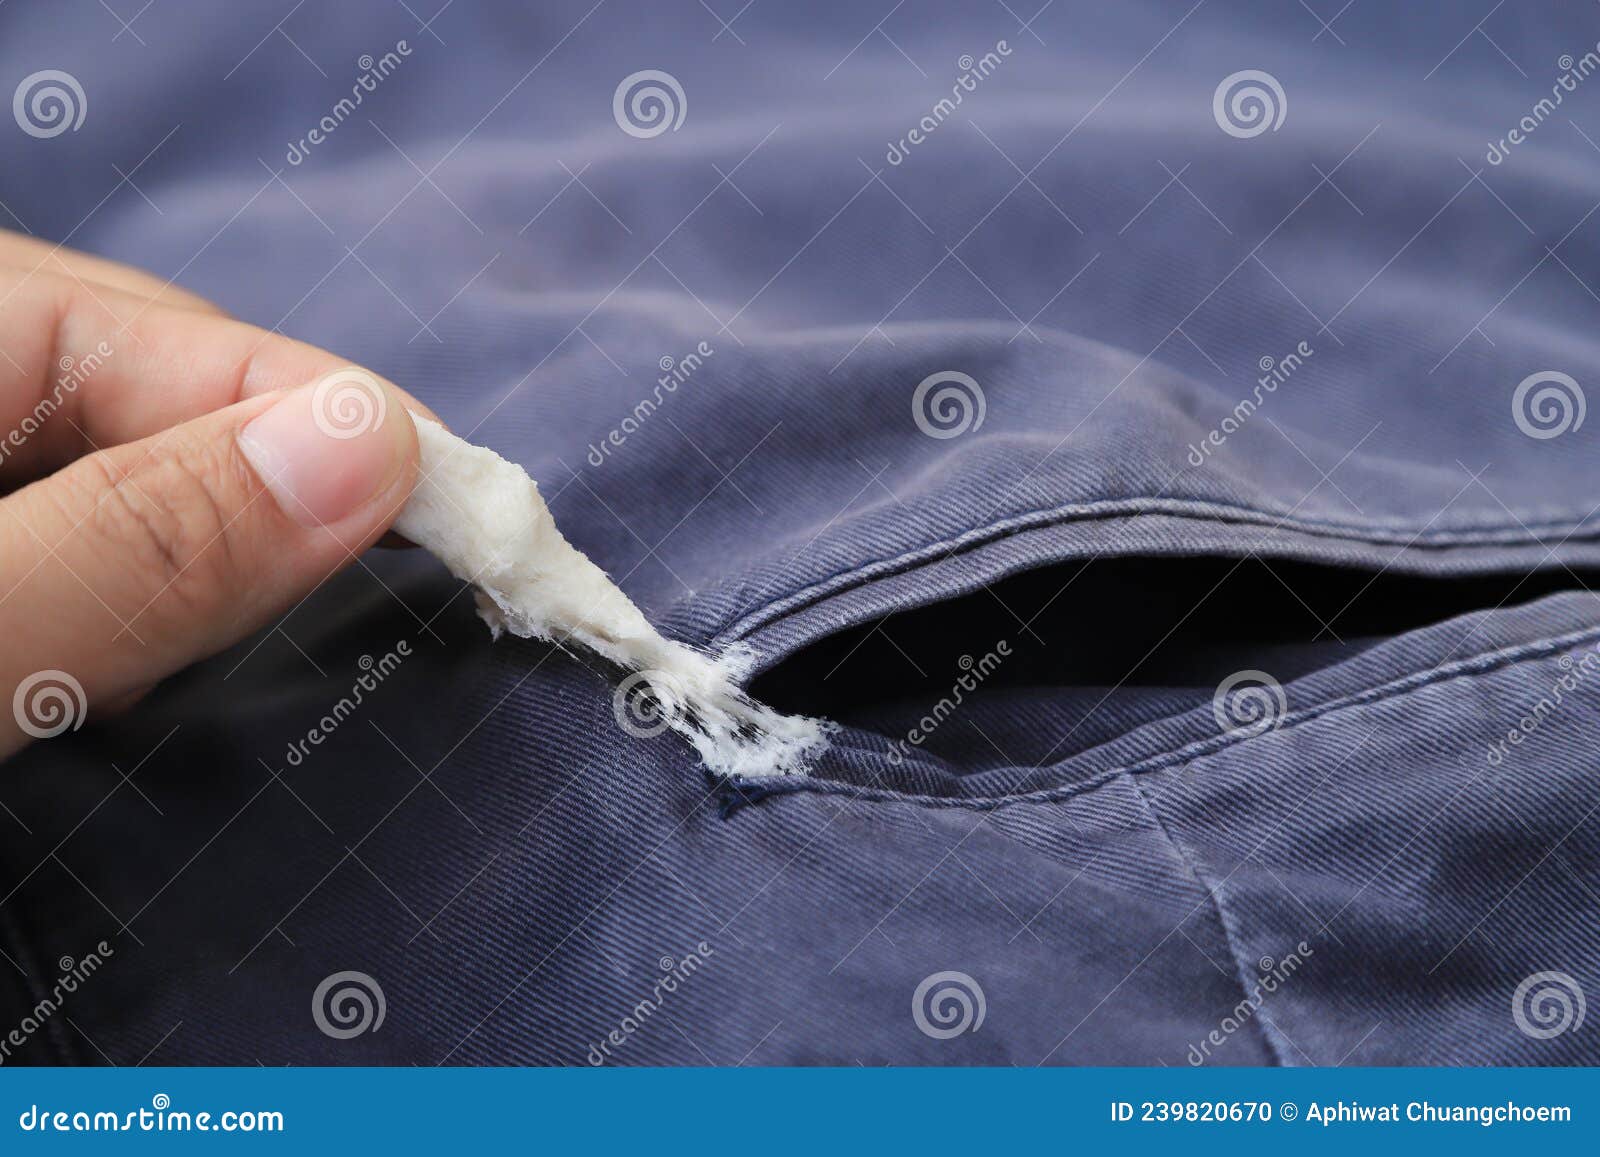 Sticky Situation  How To Remove Chewing Gum From Denim